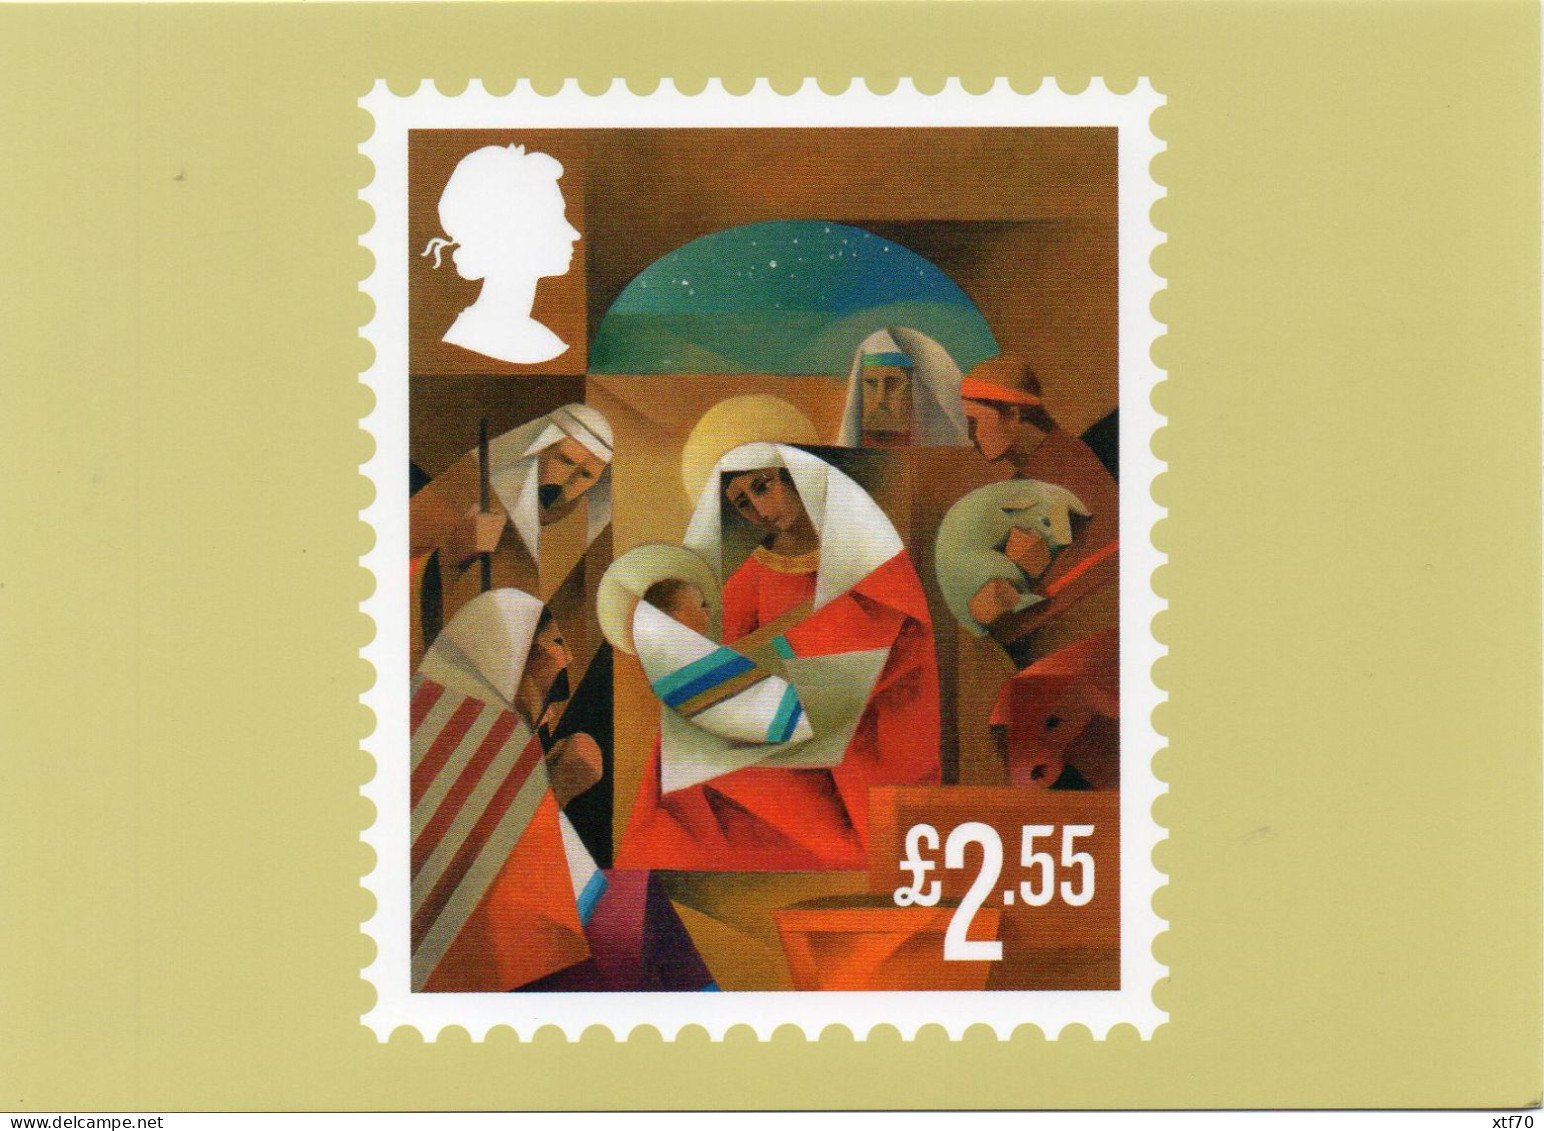 GREAT BRITAIN 2021 Christmas mint PHQ cards